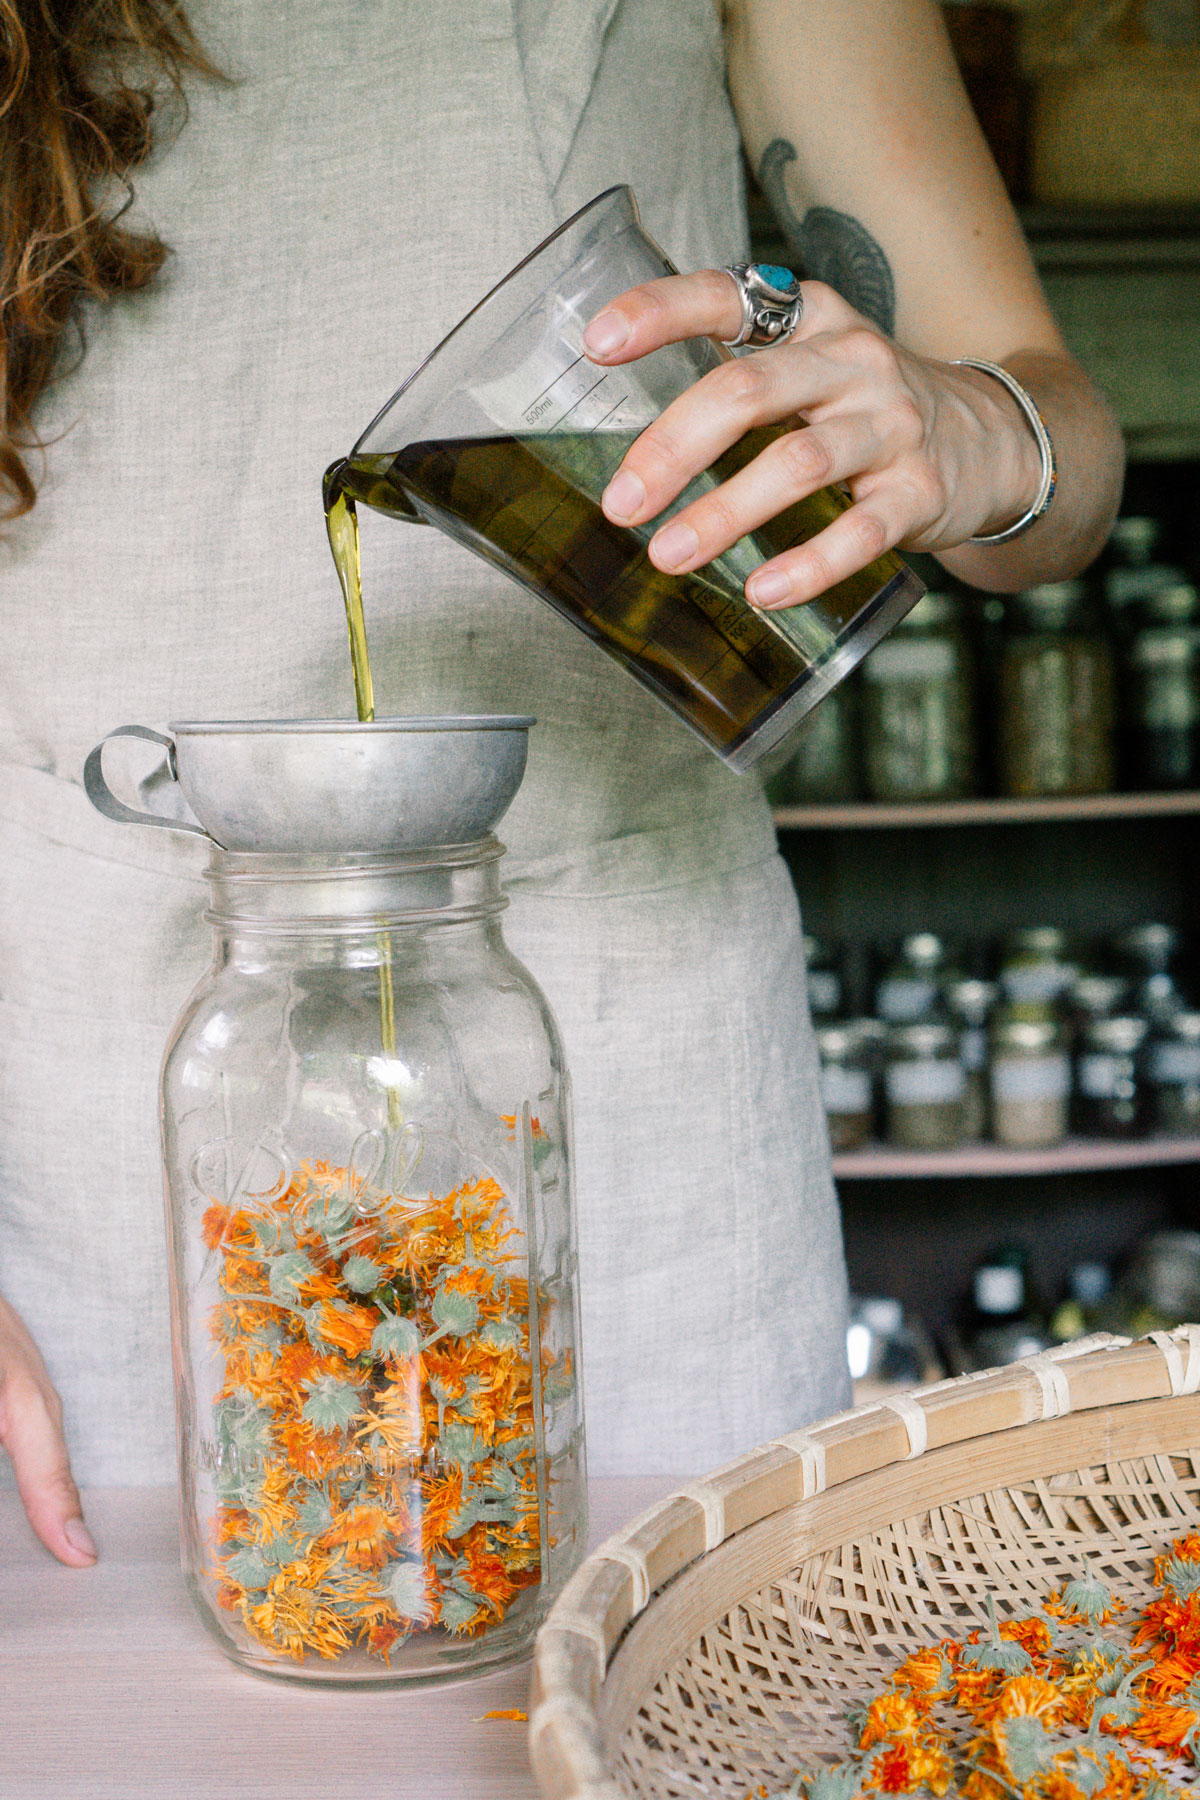 A woman pouring oil into a jar of vibrant calendula flowers